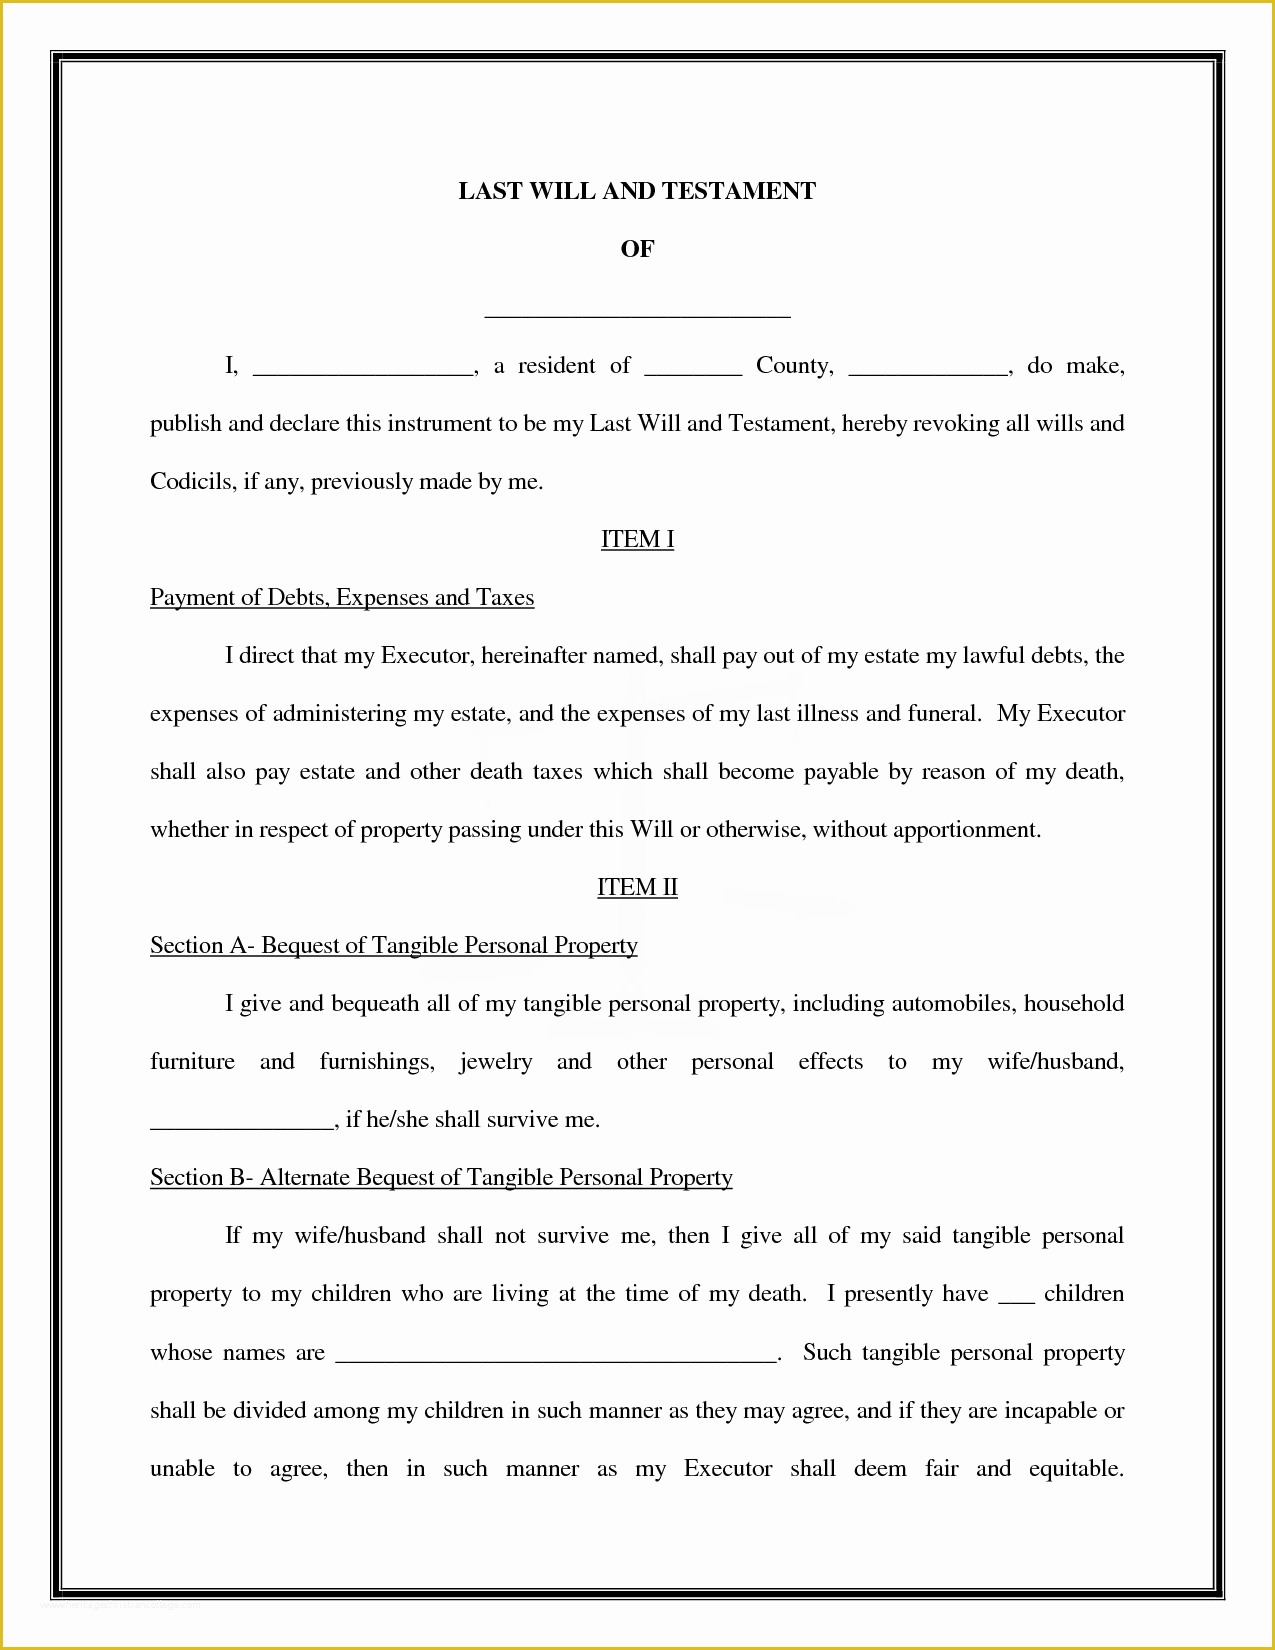 Last Will and Testament Texas Free Template Of Best S Of Last Will and Testament form Texas Blank